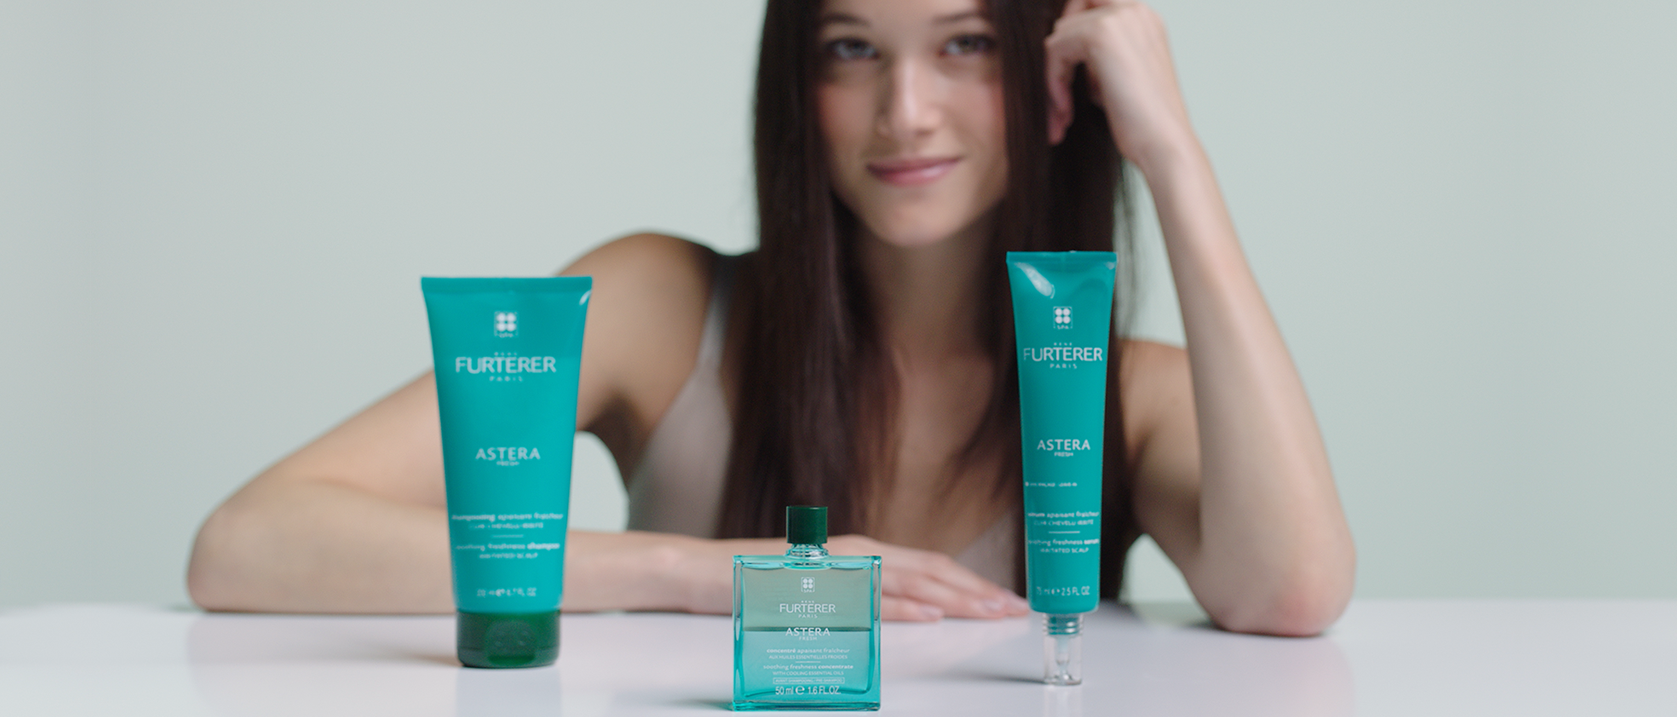 ASTERA FRESH - Soothing freshness concentrate - Irritated scalp| René Furterer